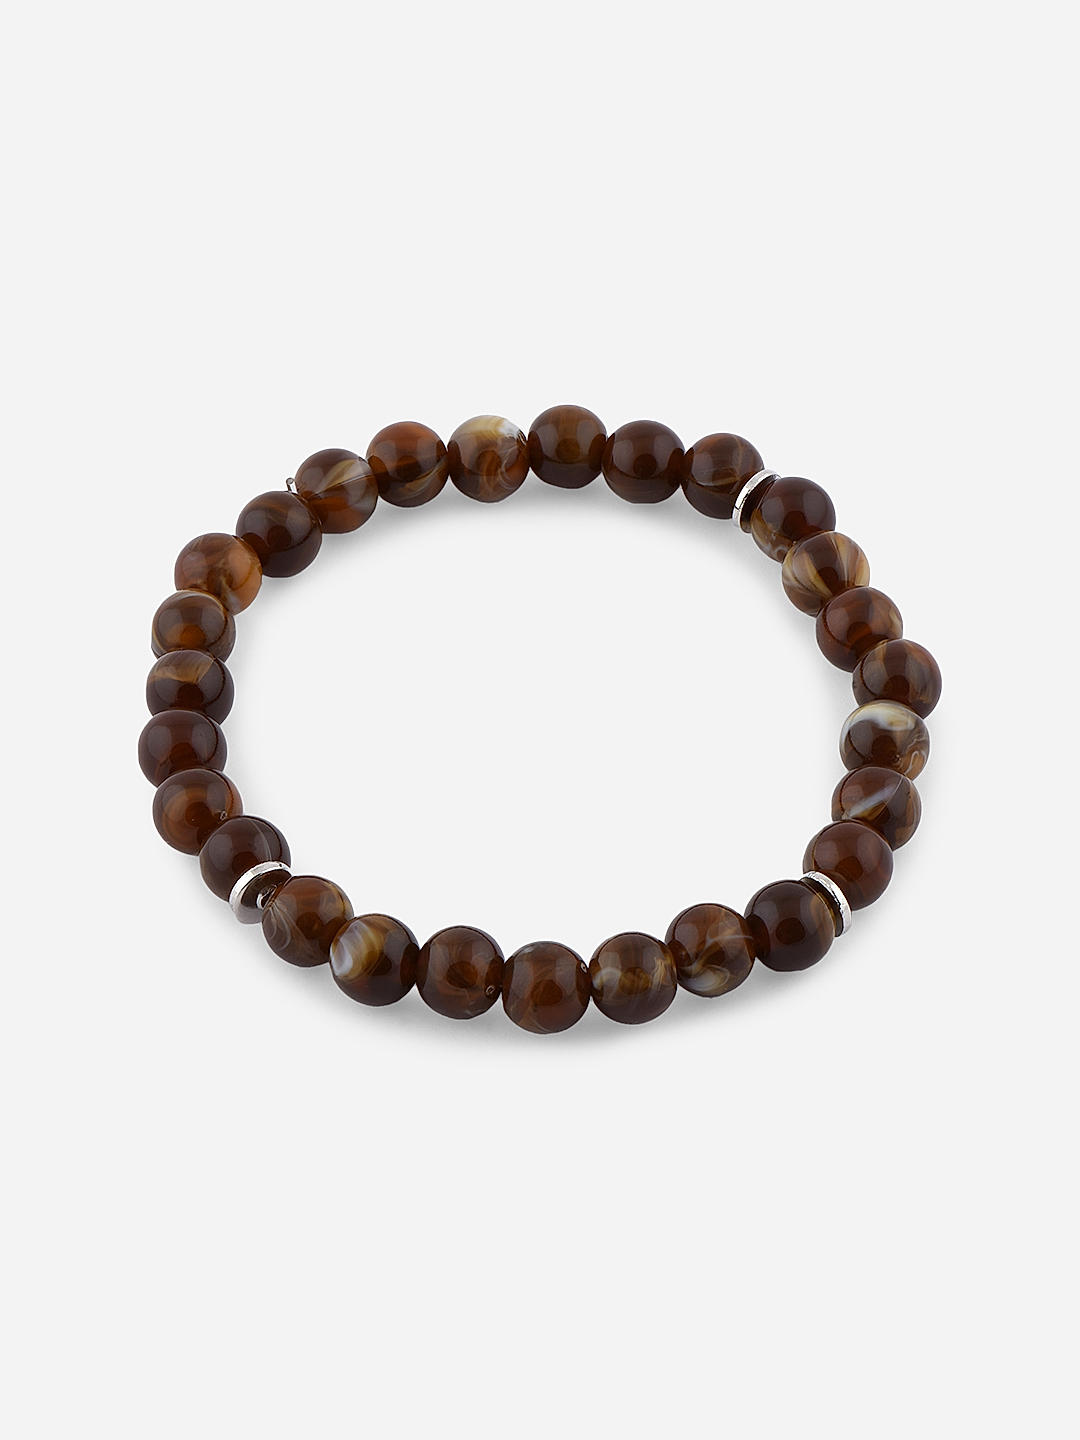 Shop by The Bro Code Blue and Brown Multi Beads with Stretchy Elastic  Adjustable Set of 3 Bracelet For Men